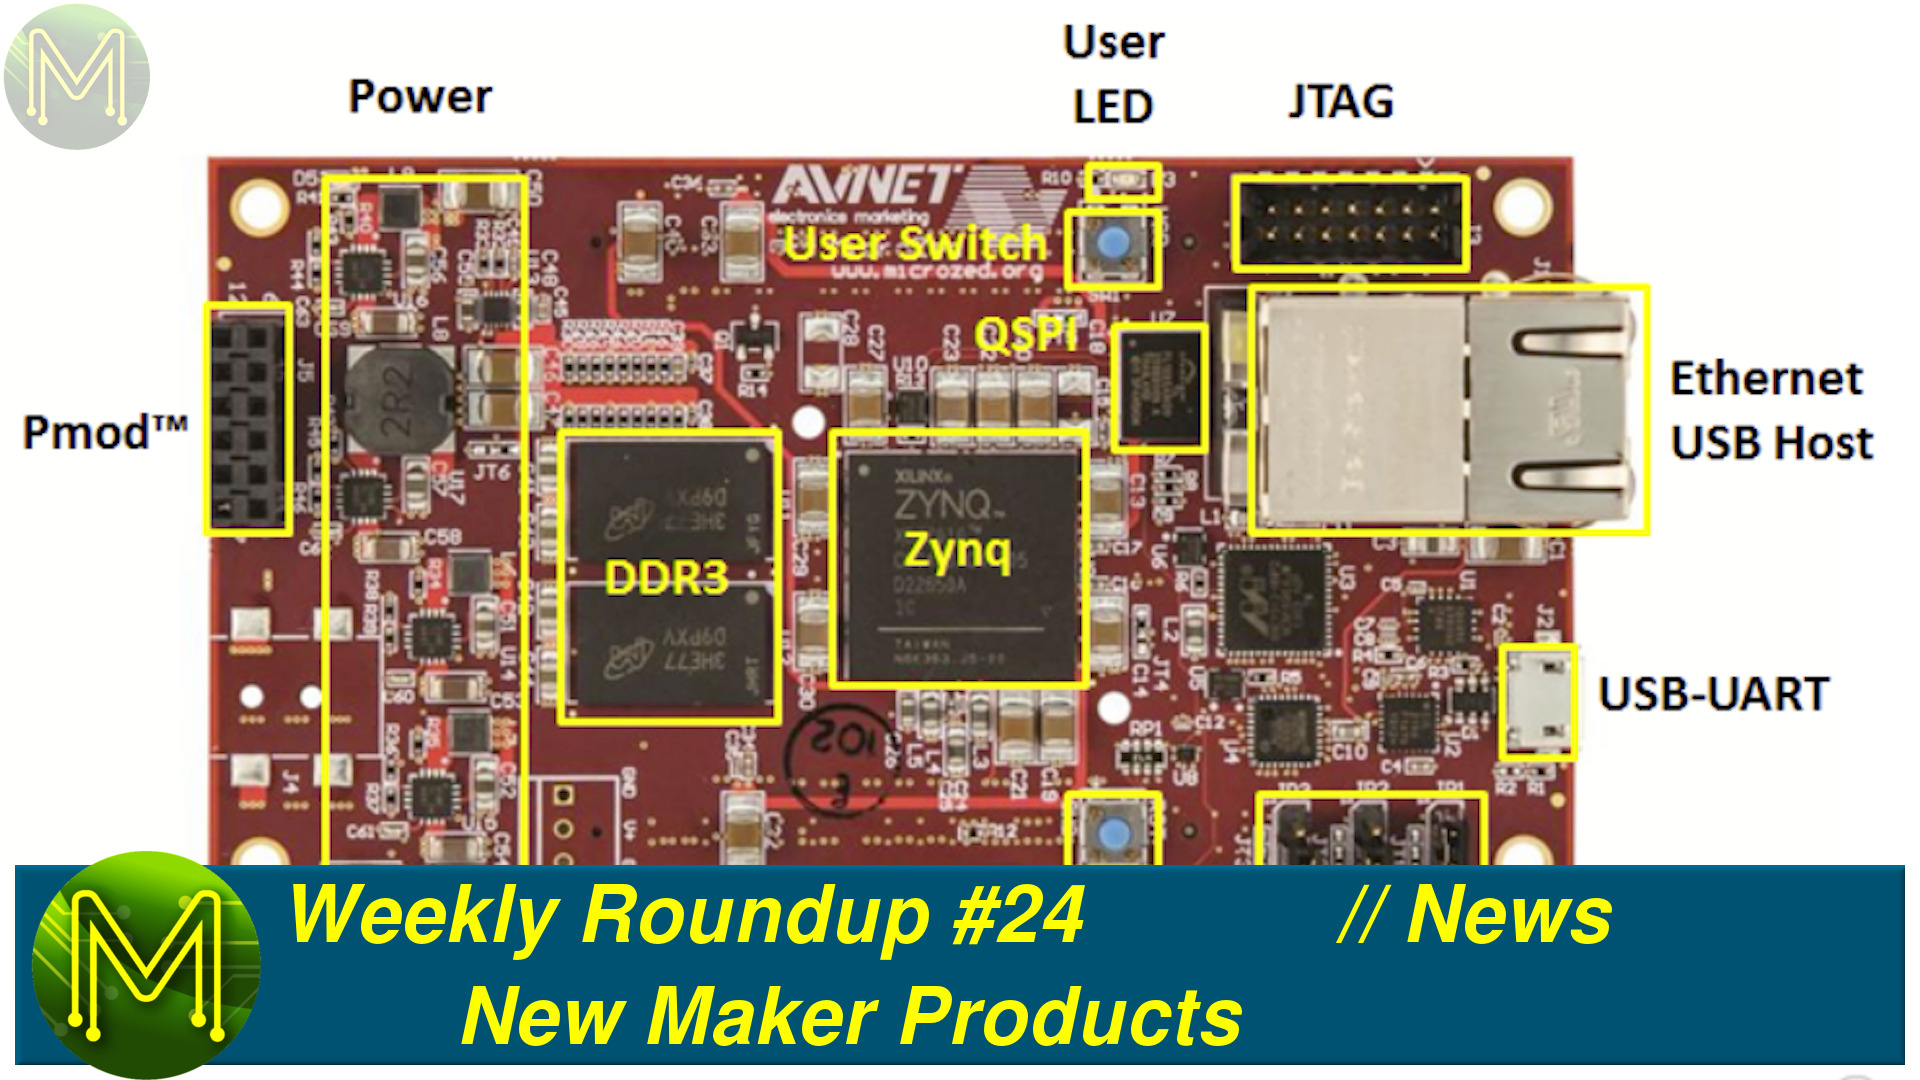 Weekly Roundup #24 - New Maker Products // News